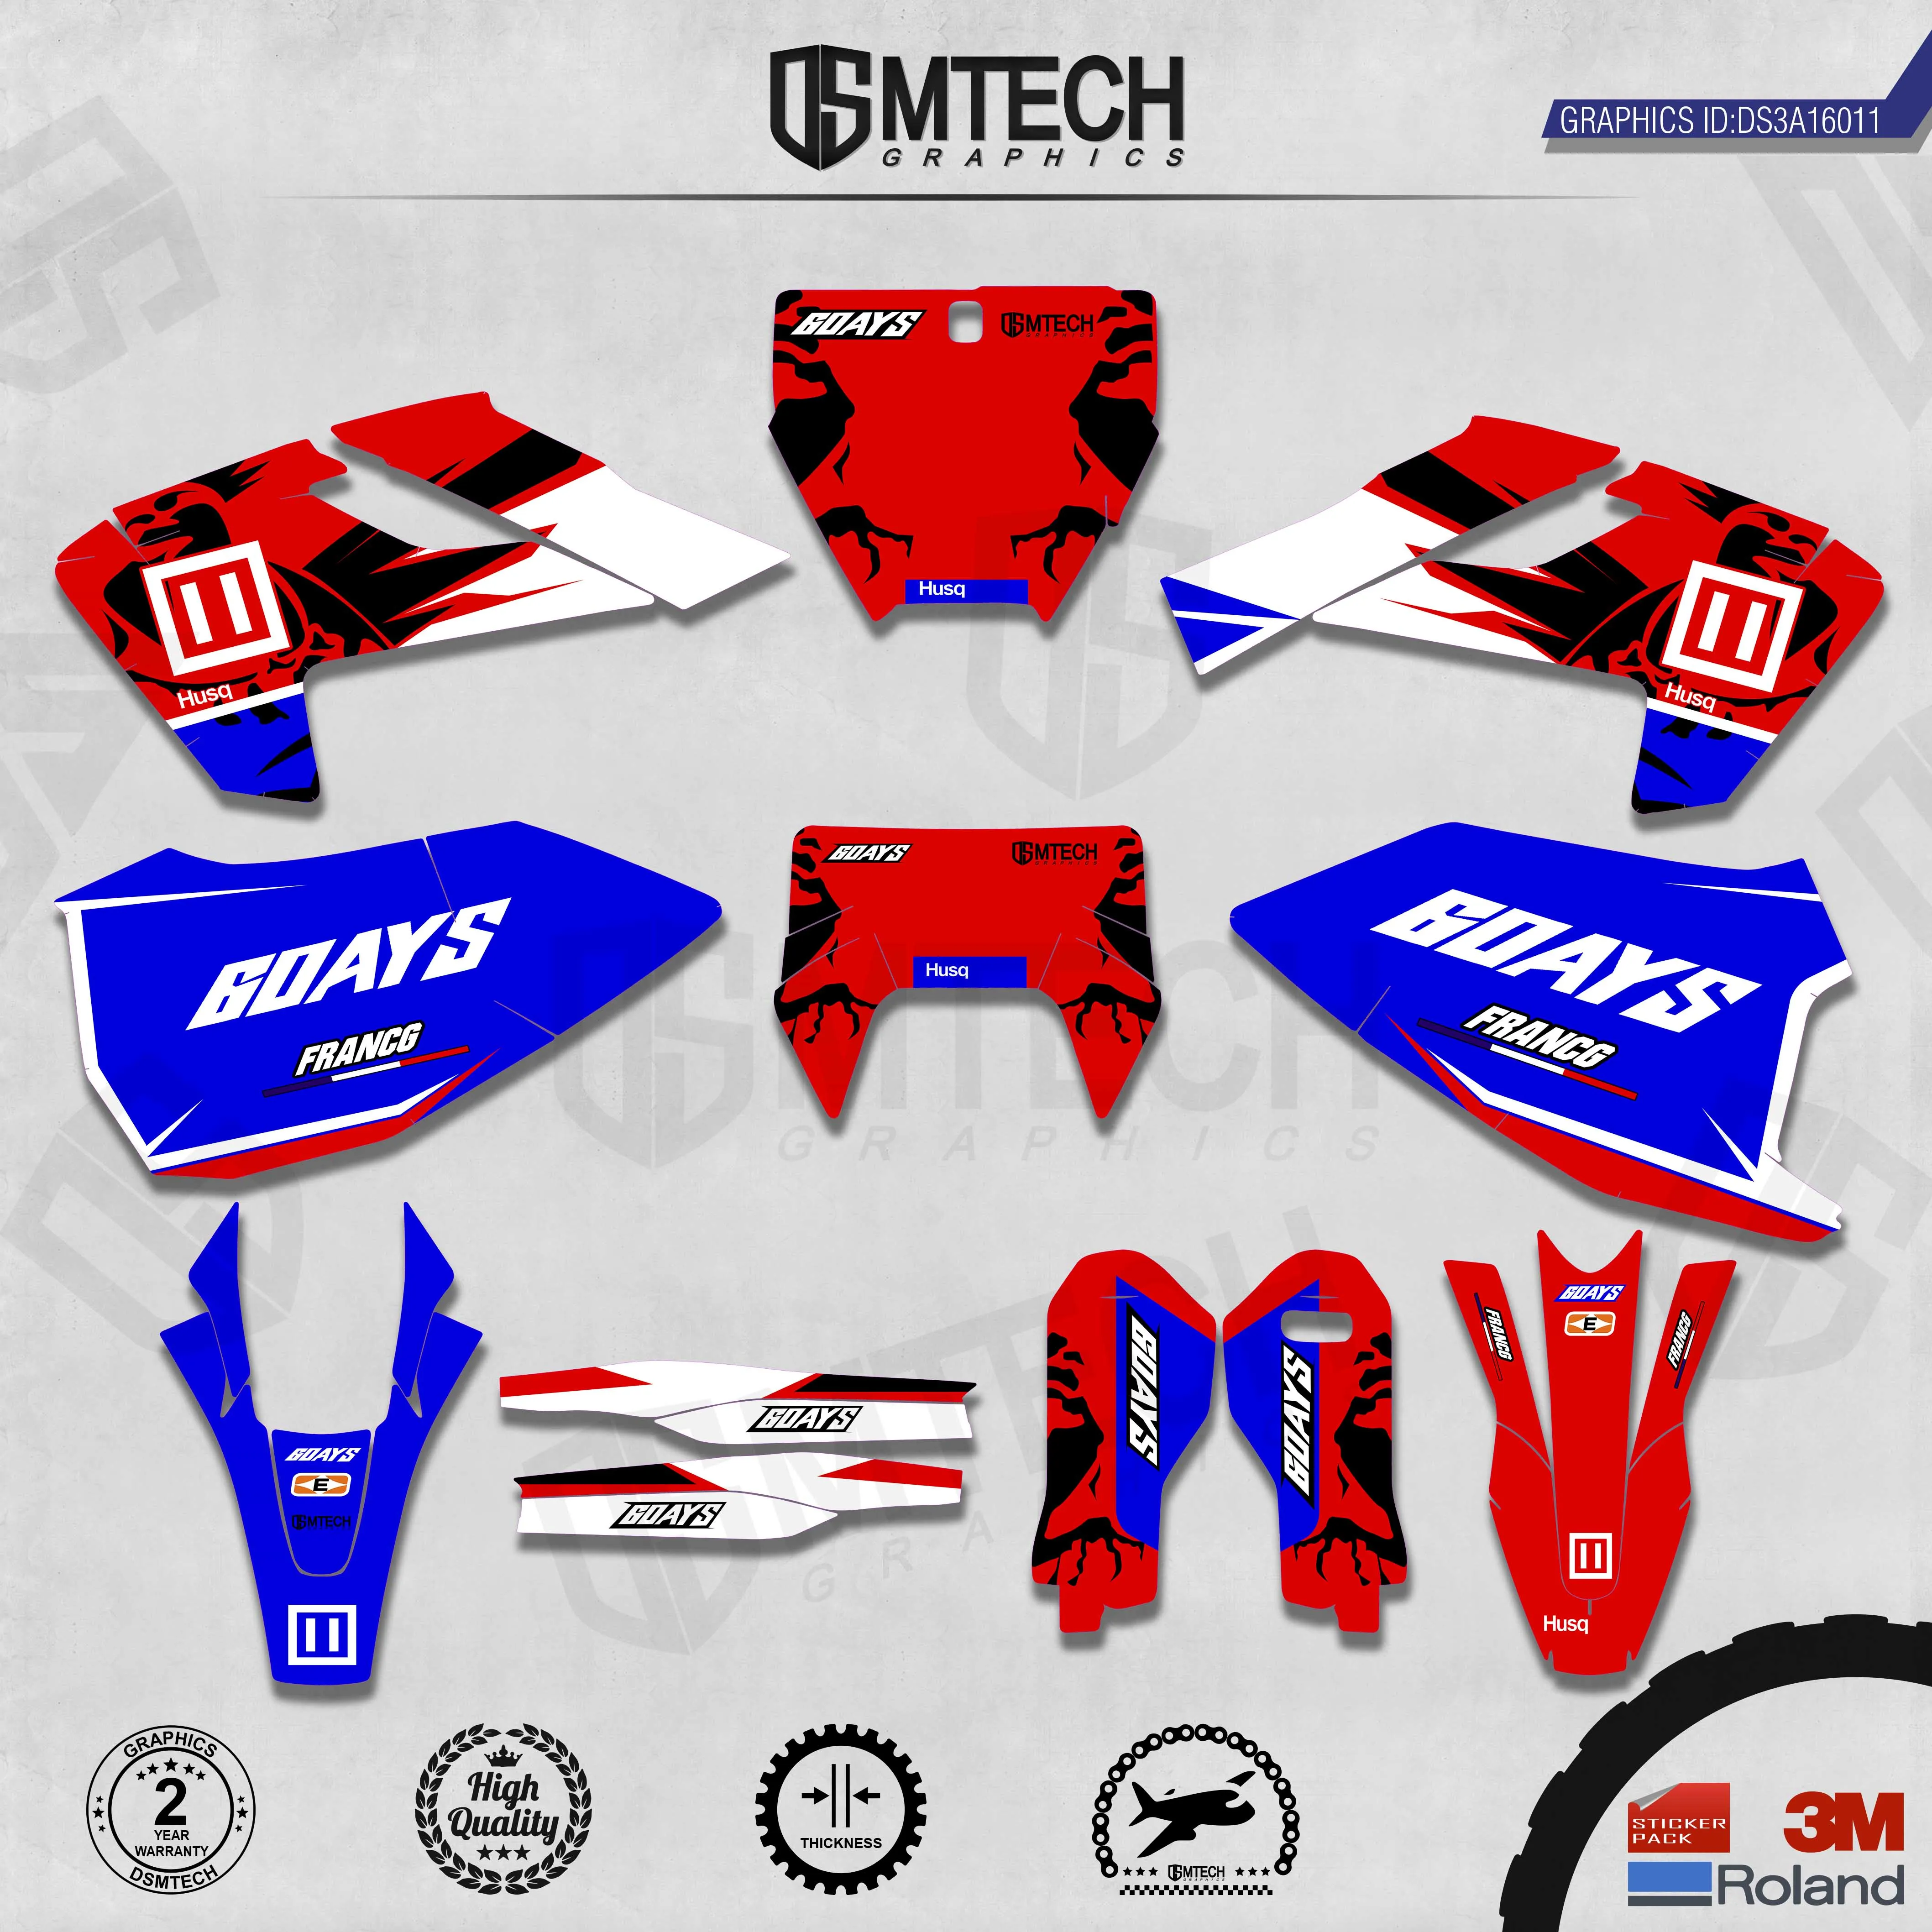 DSMTECH Customized Team Graphics Backgrounds Decals 3M Custom Stickers For TC FC TX FX FS 2016-2018  TE FE 2017-2019  011